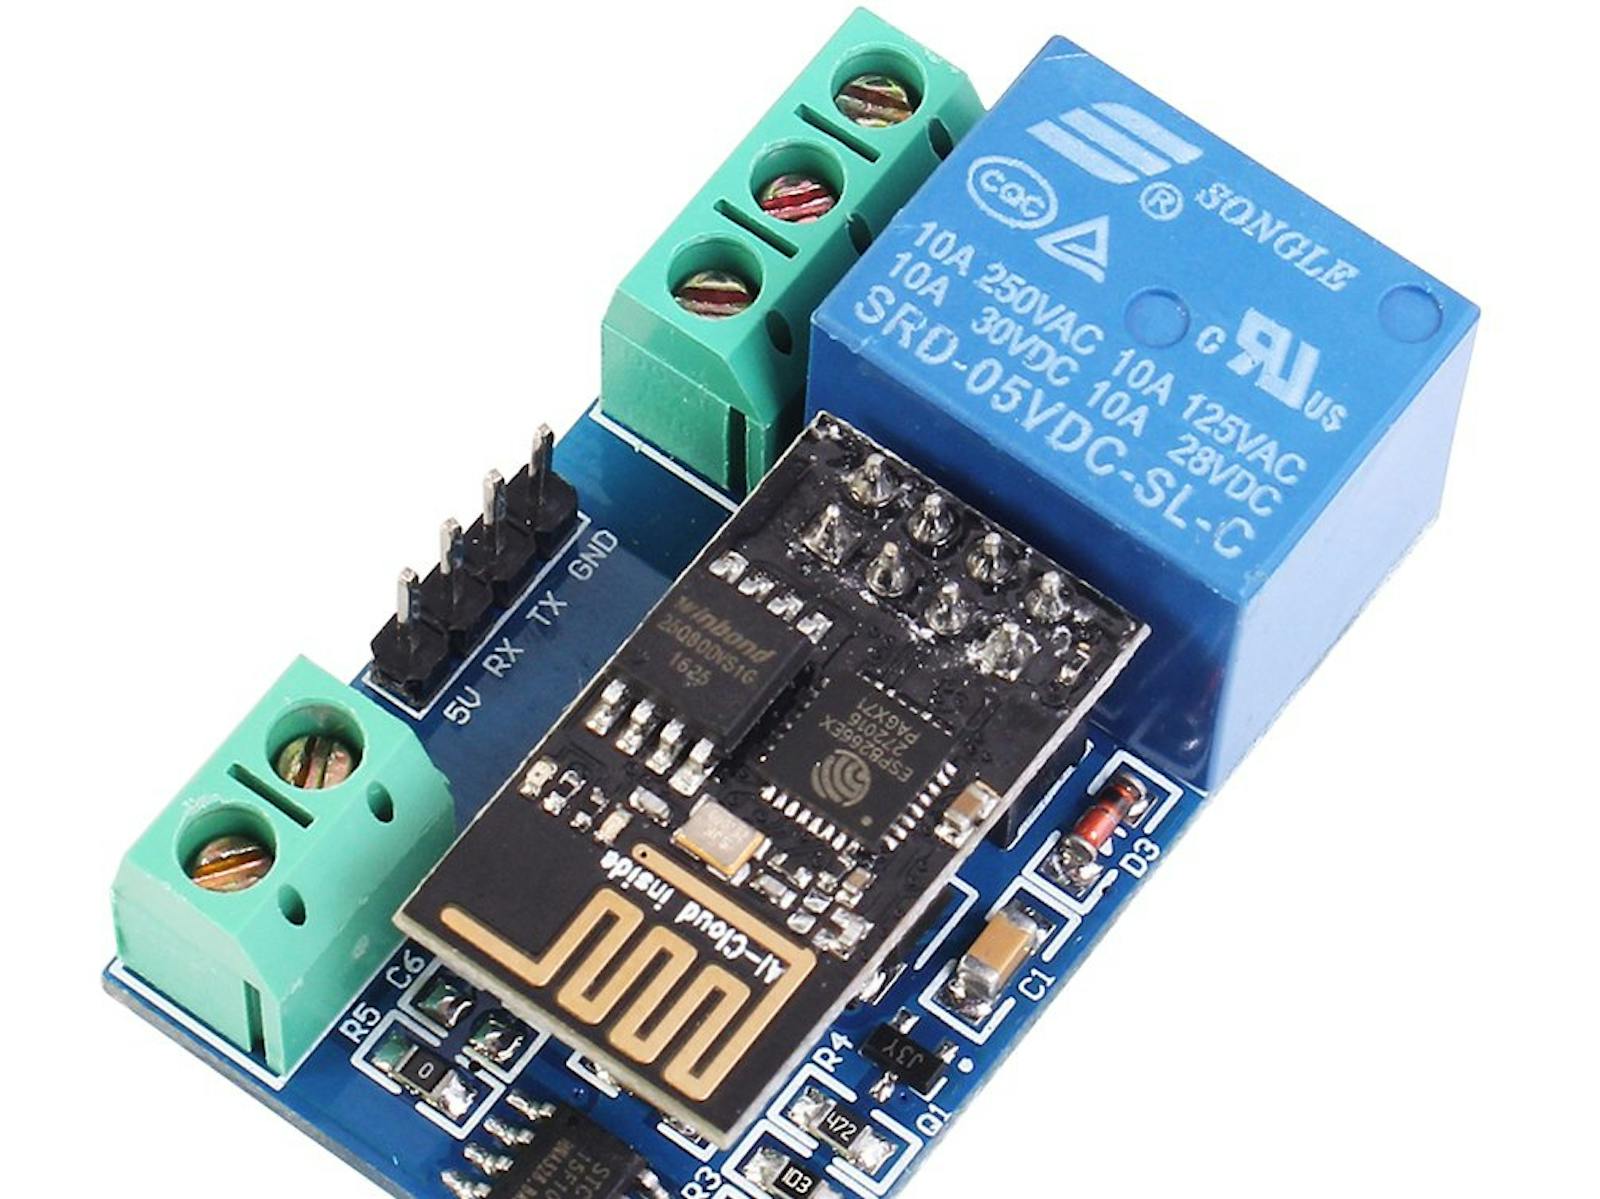 ESP8266 Network Relay WIFI Module from MMM999 on Tindie